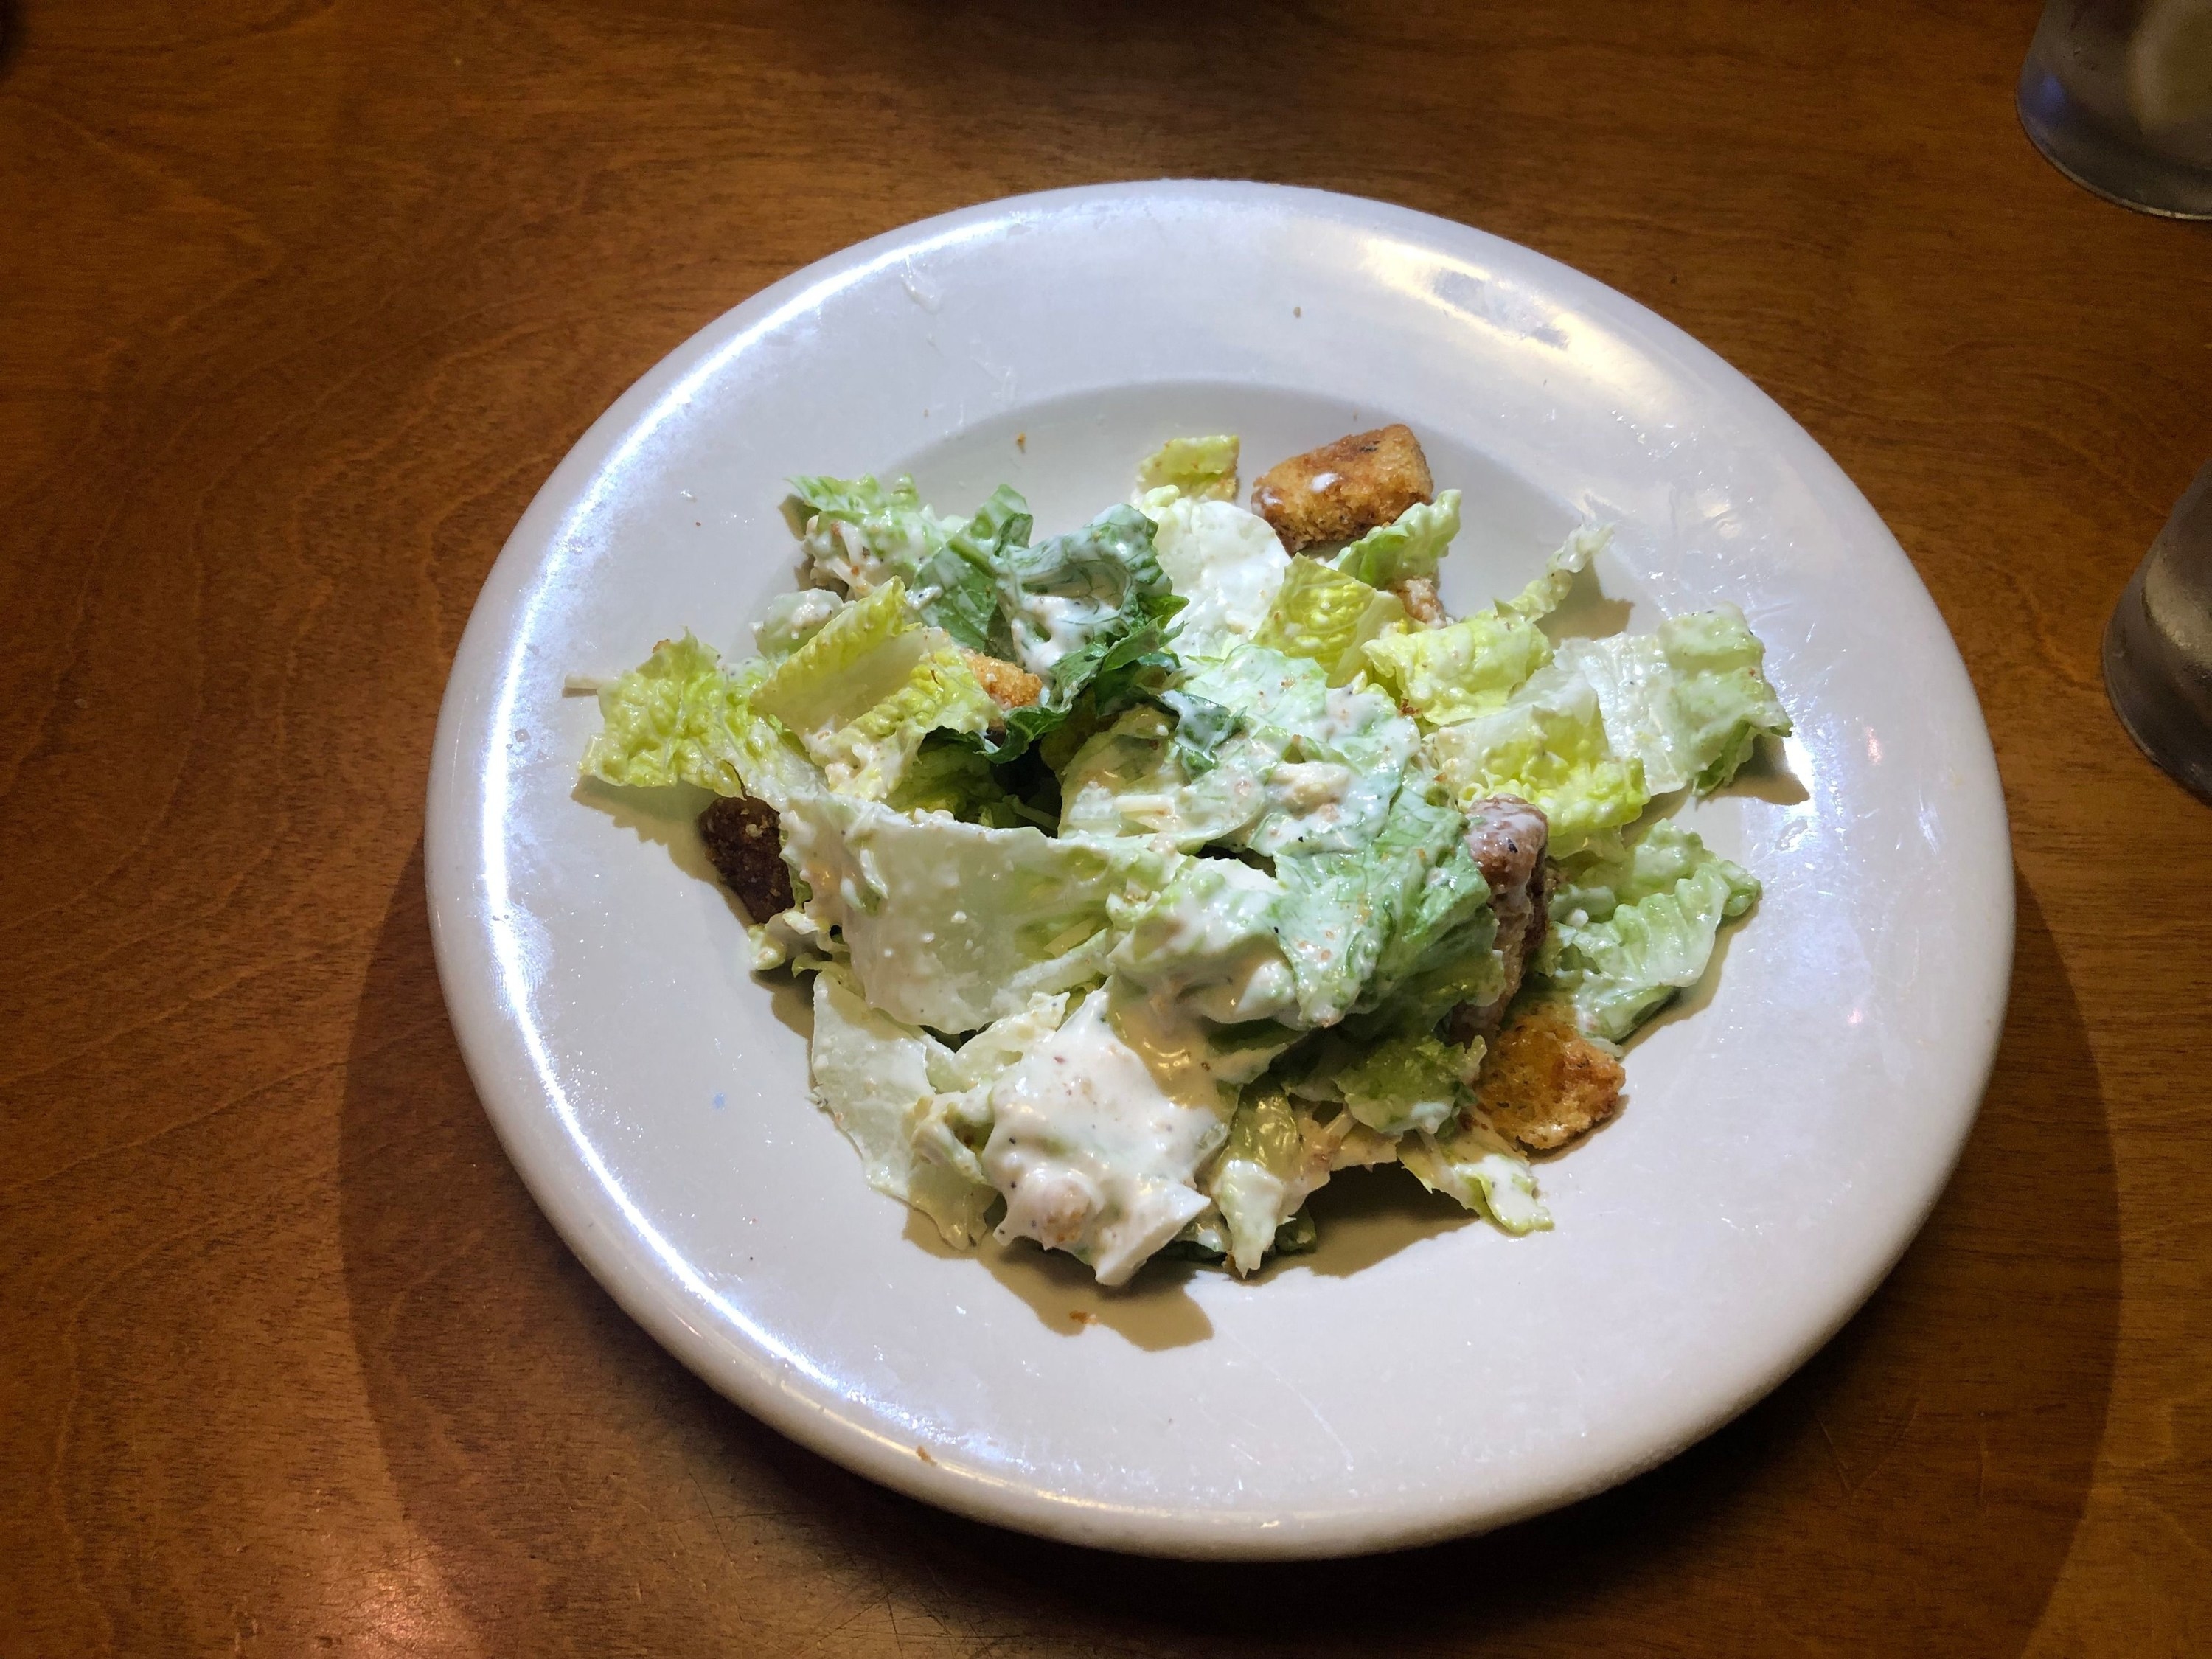 Caesar side salad with lots of dressing from Texas Roadhouse